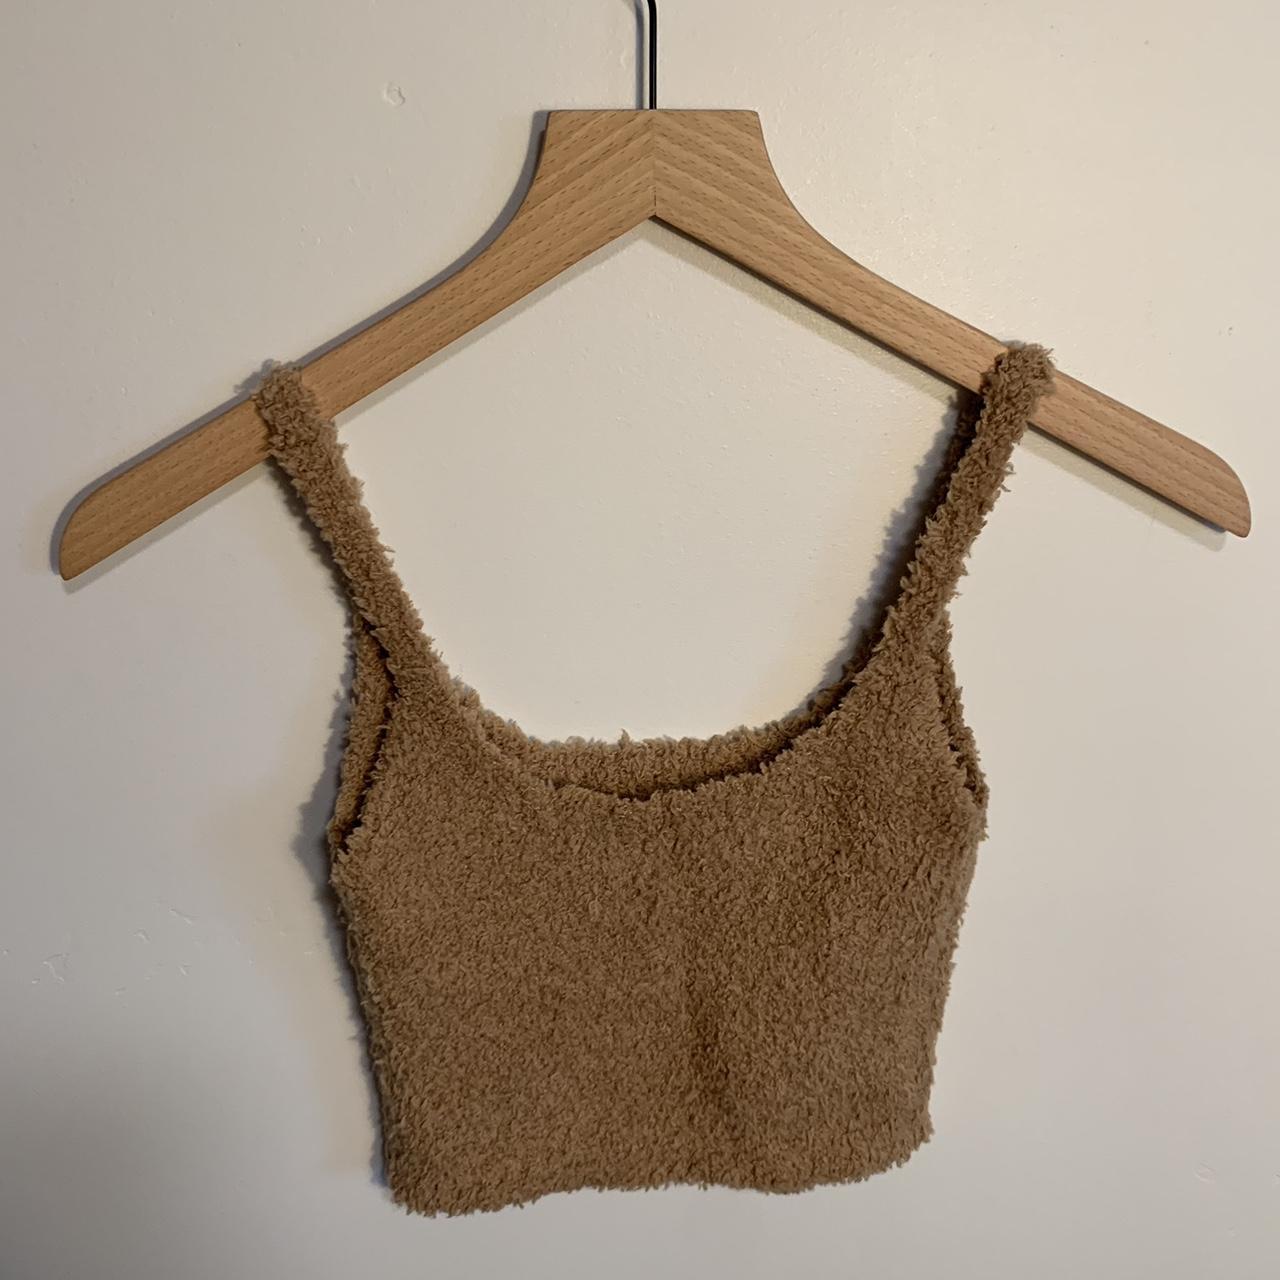 SKIMS Cozy Knit Tank in Bone S/M Size M - $75 New With Tags - From Matilda